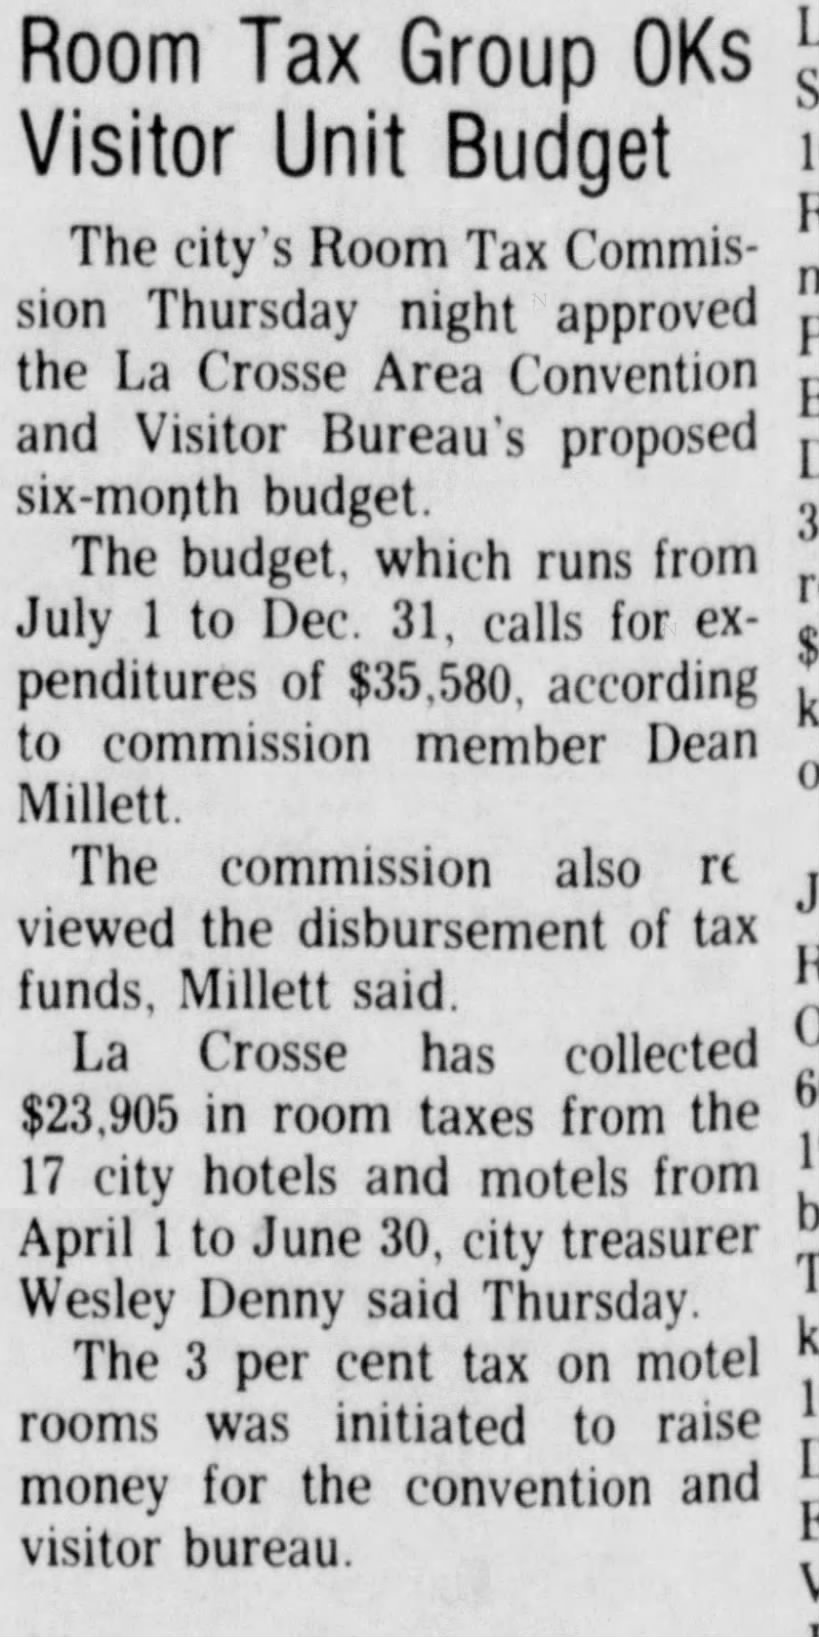 1975-08 Room Tax at $23,905 collected